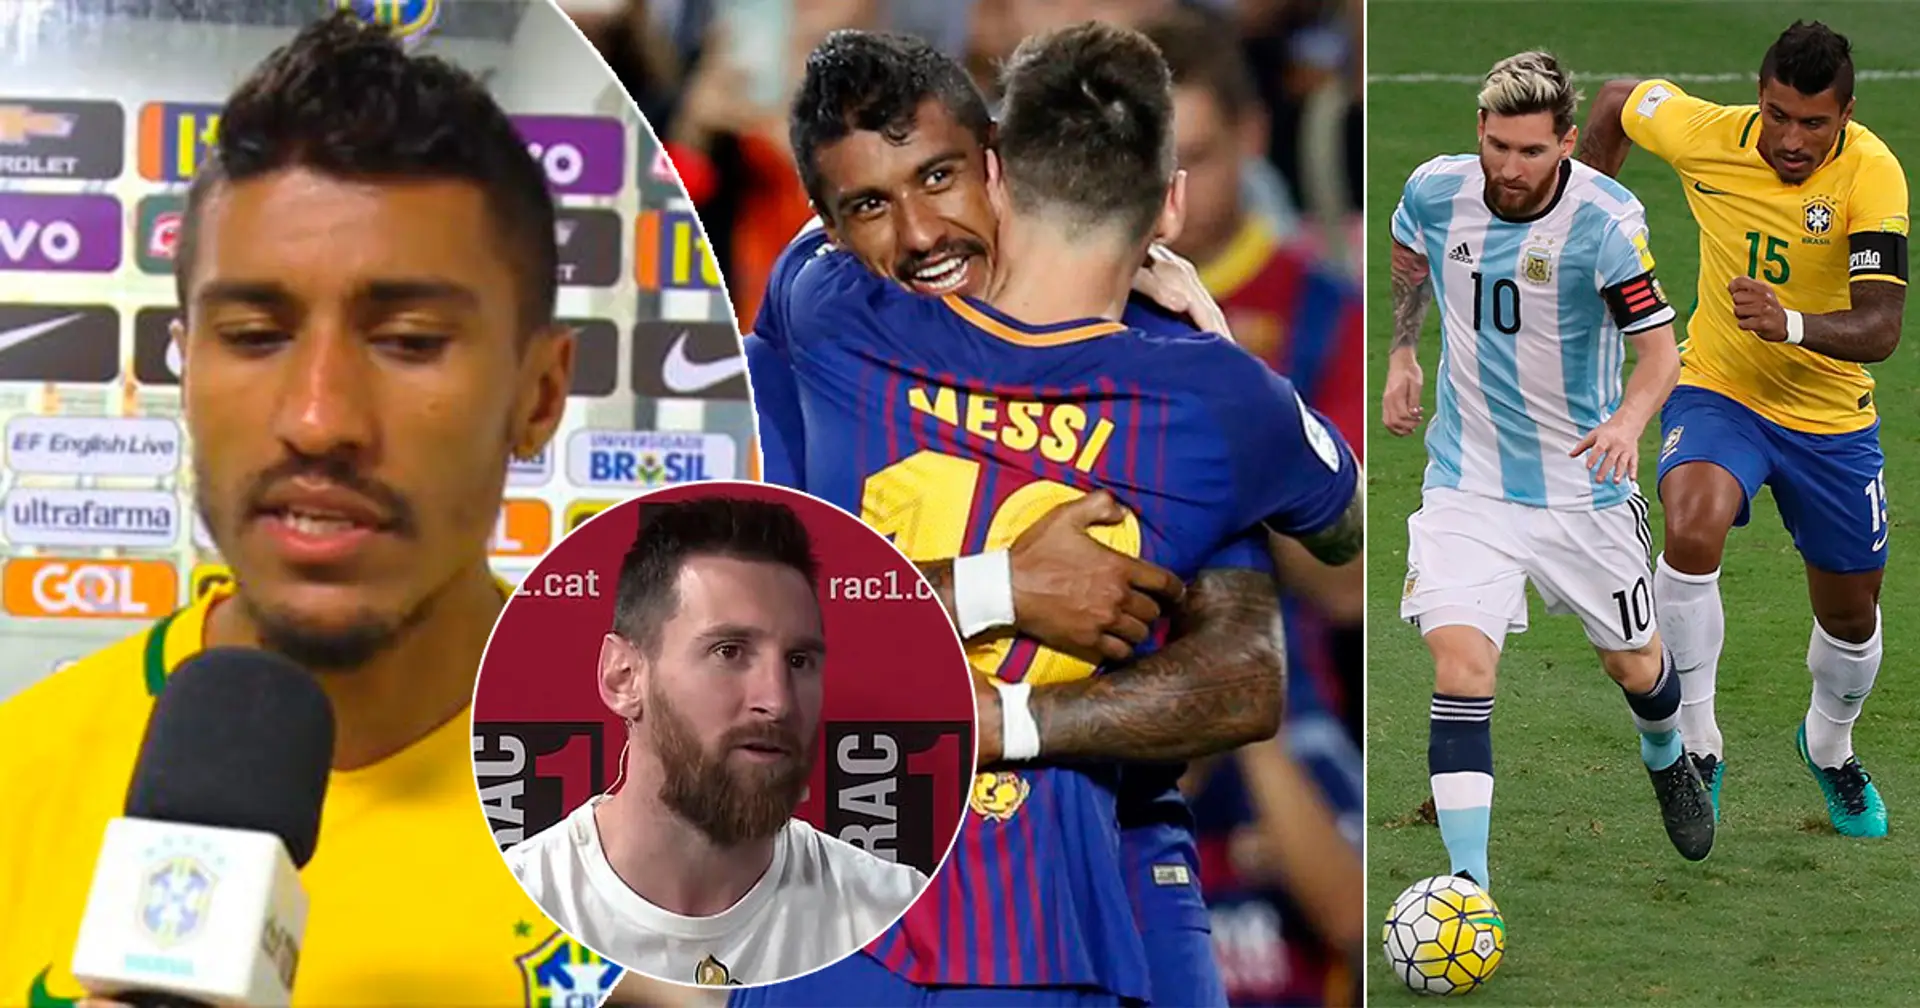 'I almost fell flat on my face': How Messi made Paulinho sign for FC Barcelona